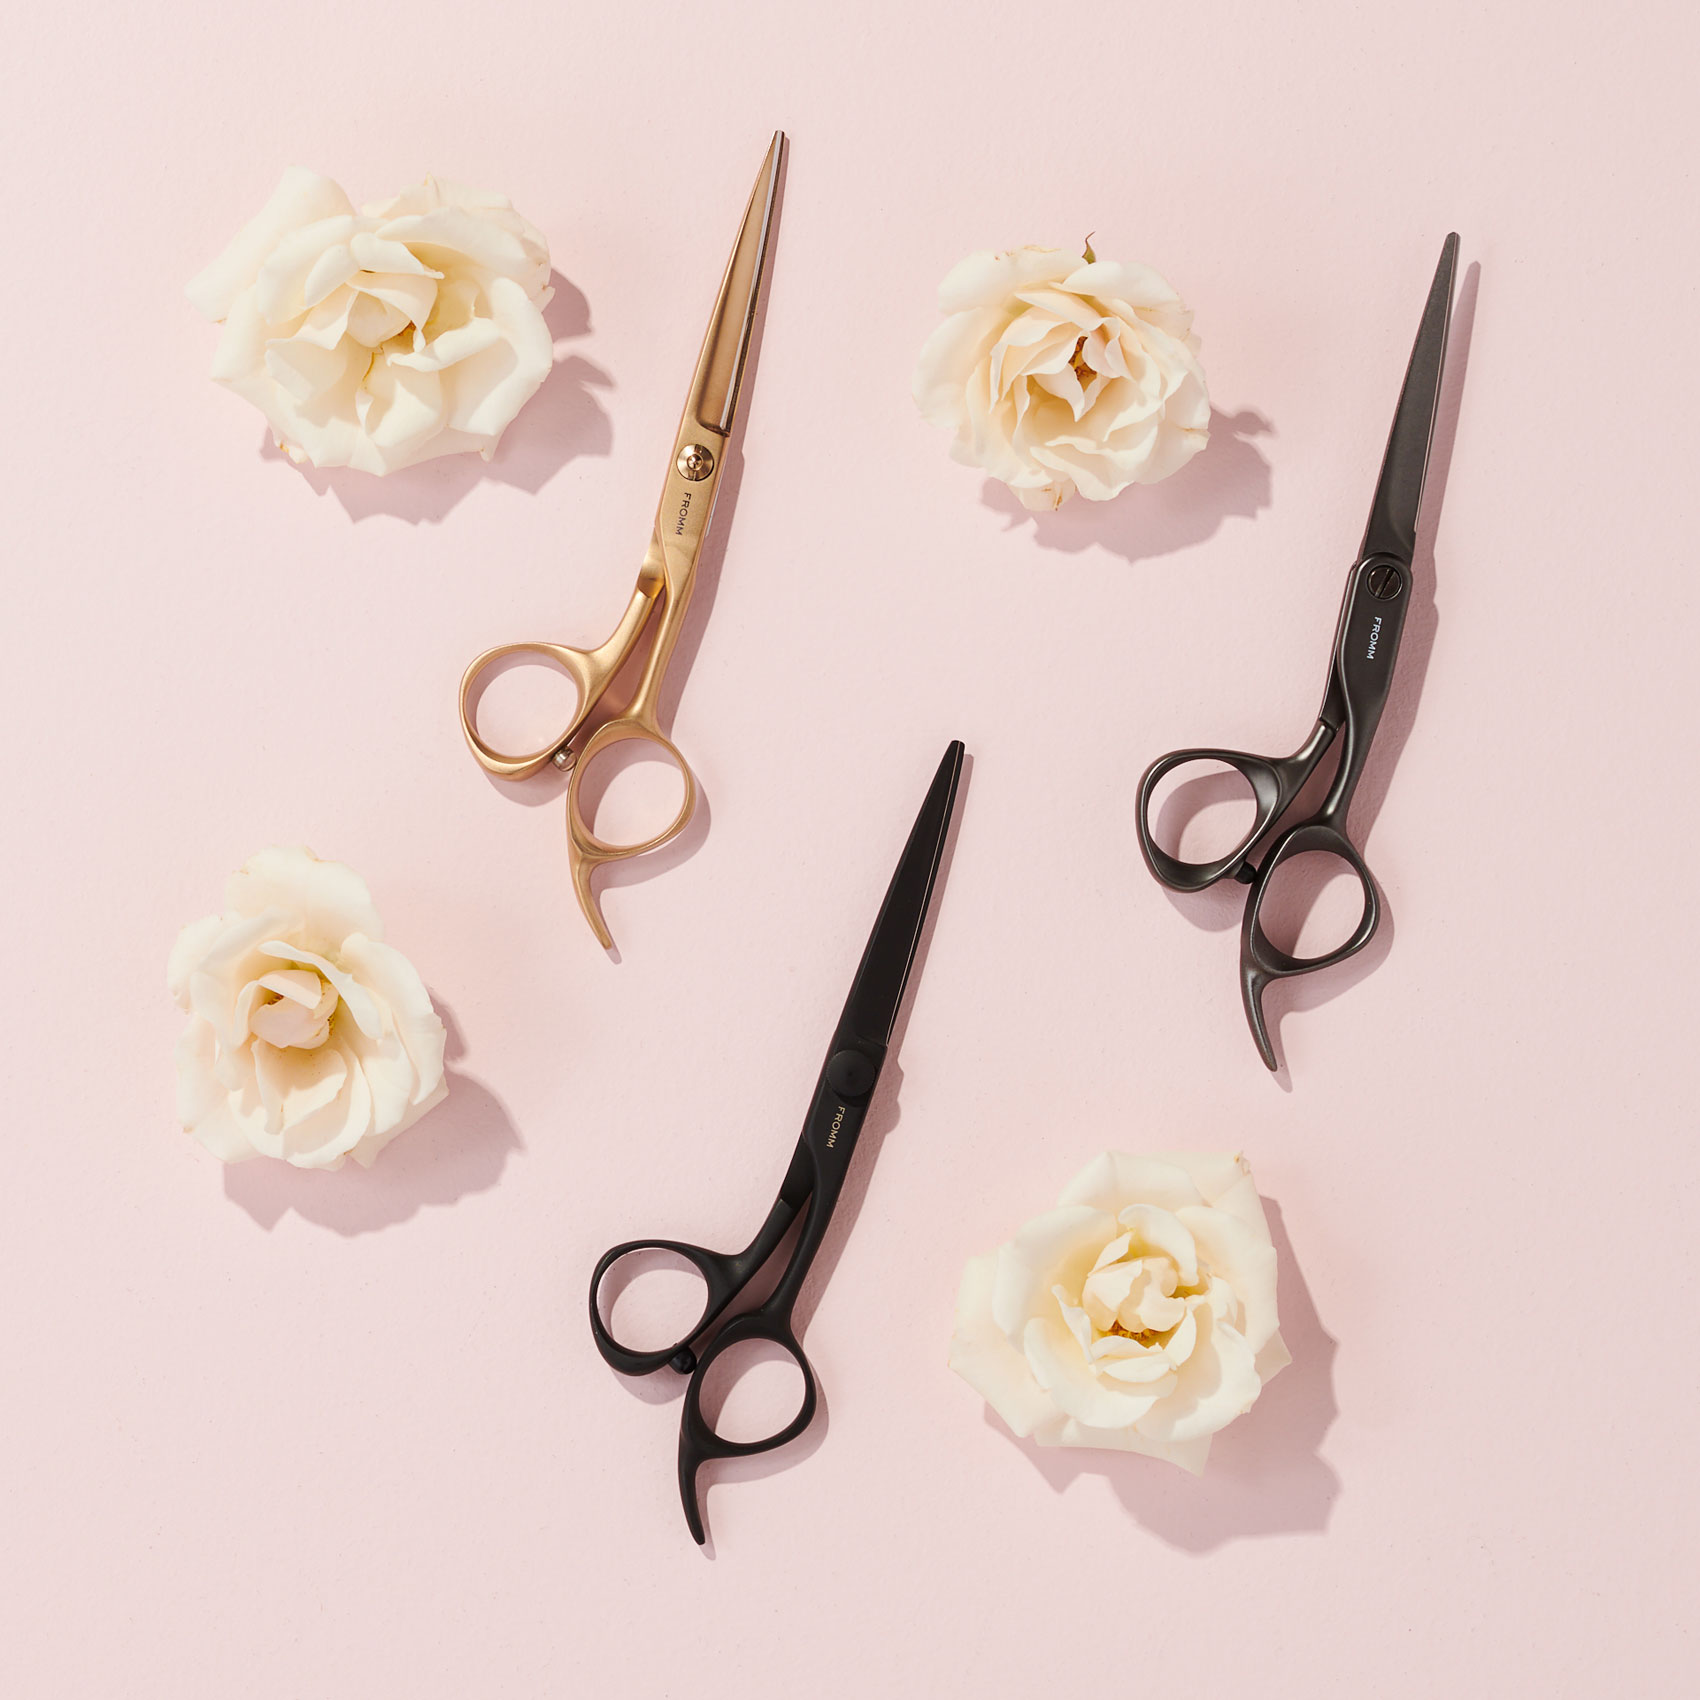 Three hair cutting shears on pale pink surface with white roses